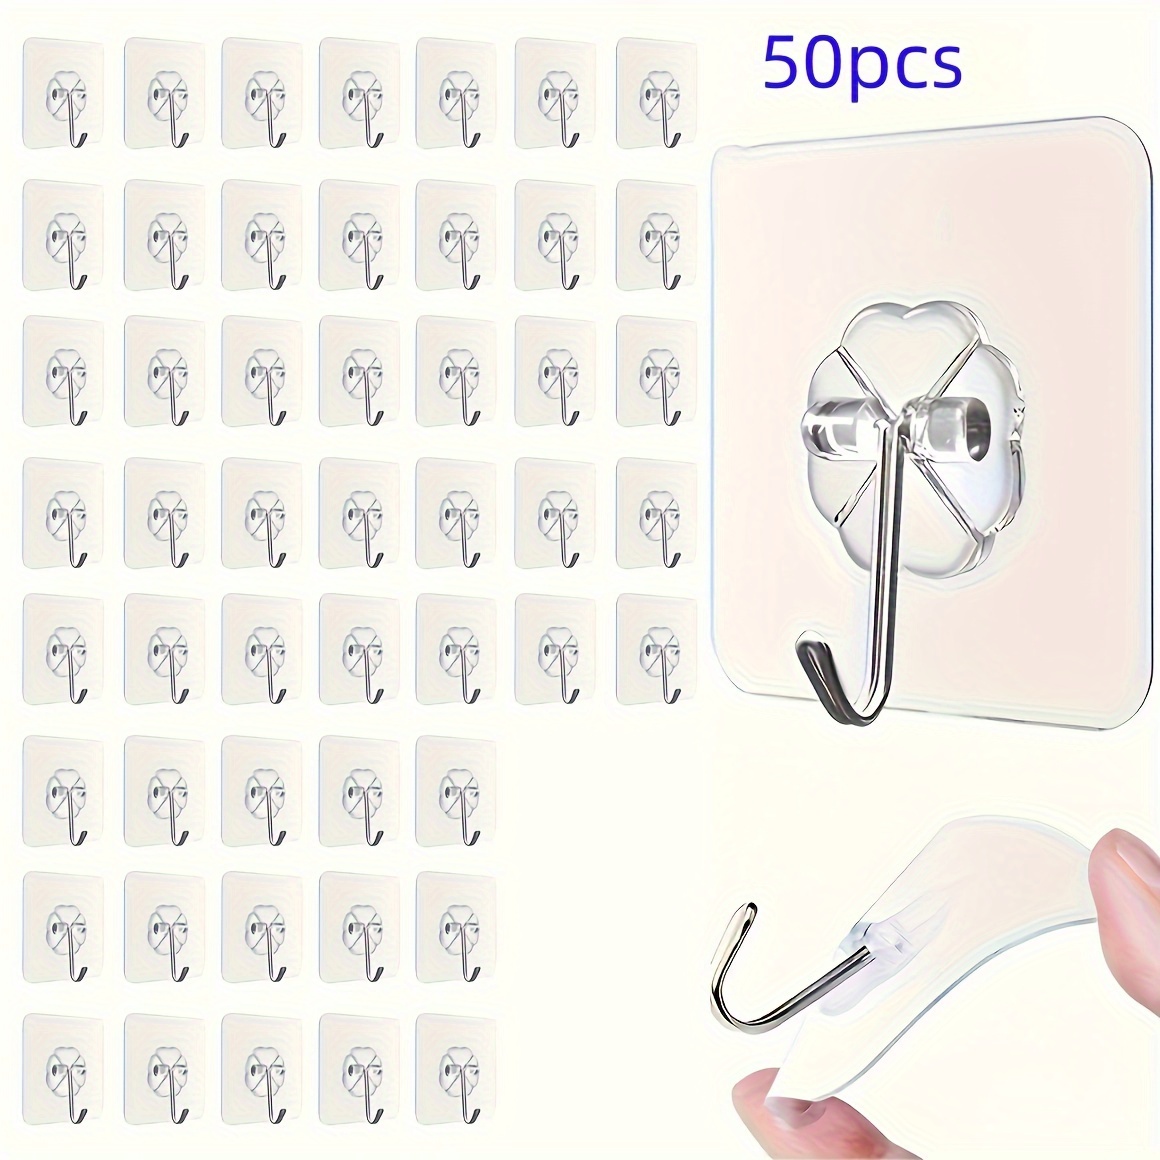 

Piece Of 25/50 - Strong Adhesive Metal Hooks, Transparent, No-damage Wall Mount For Home Organization & Holiday Decorations